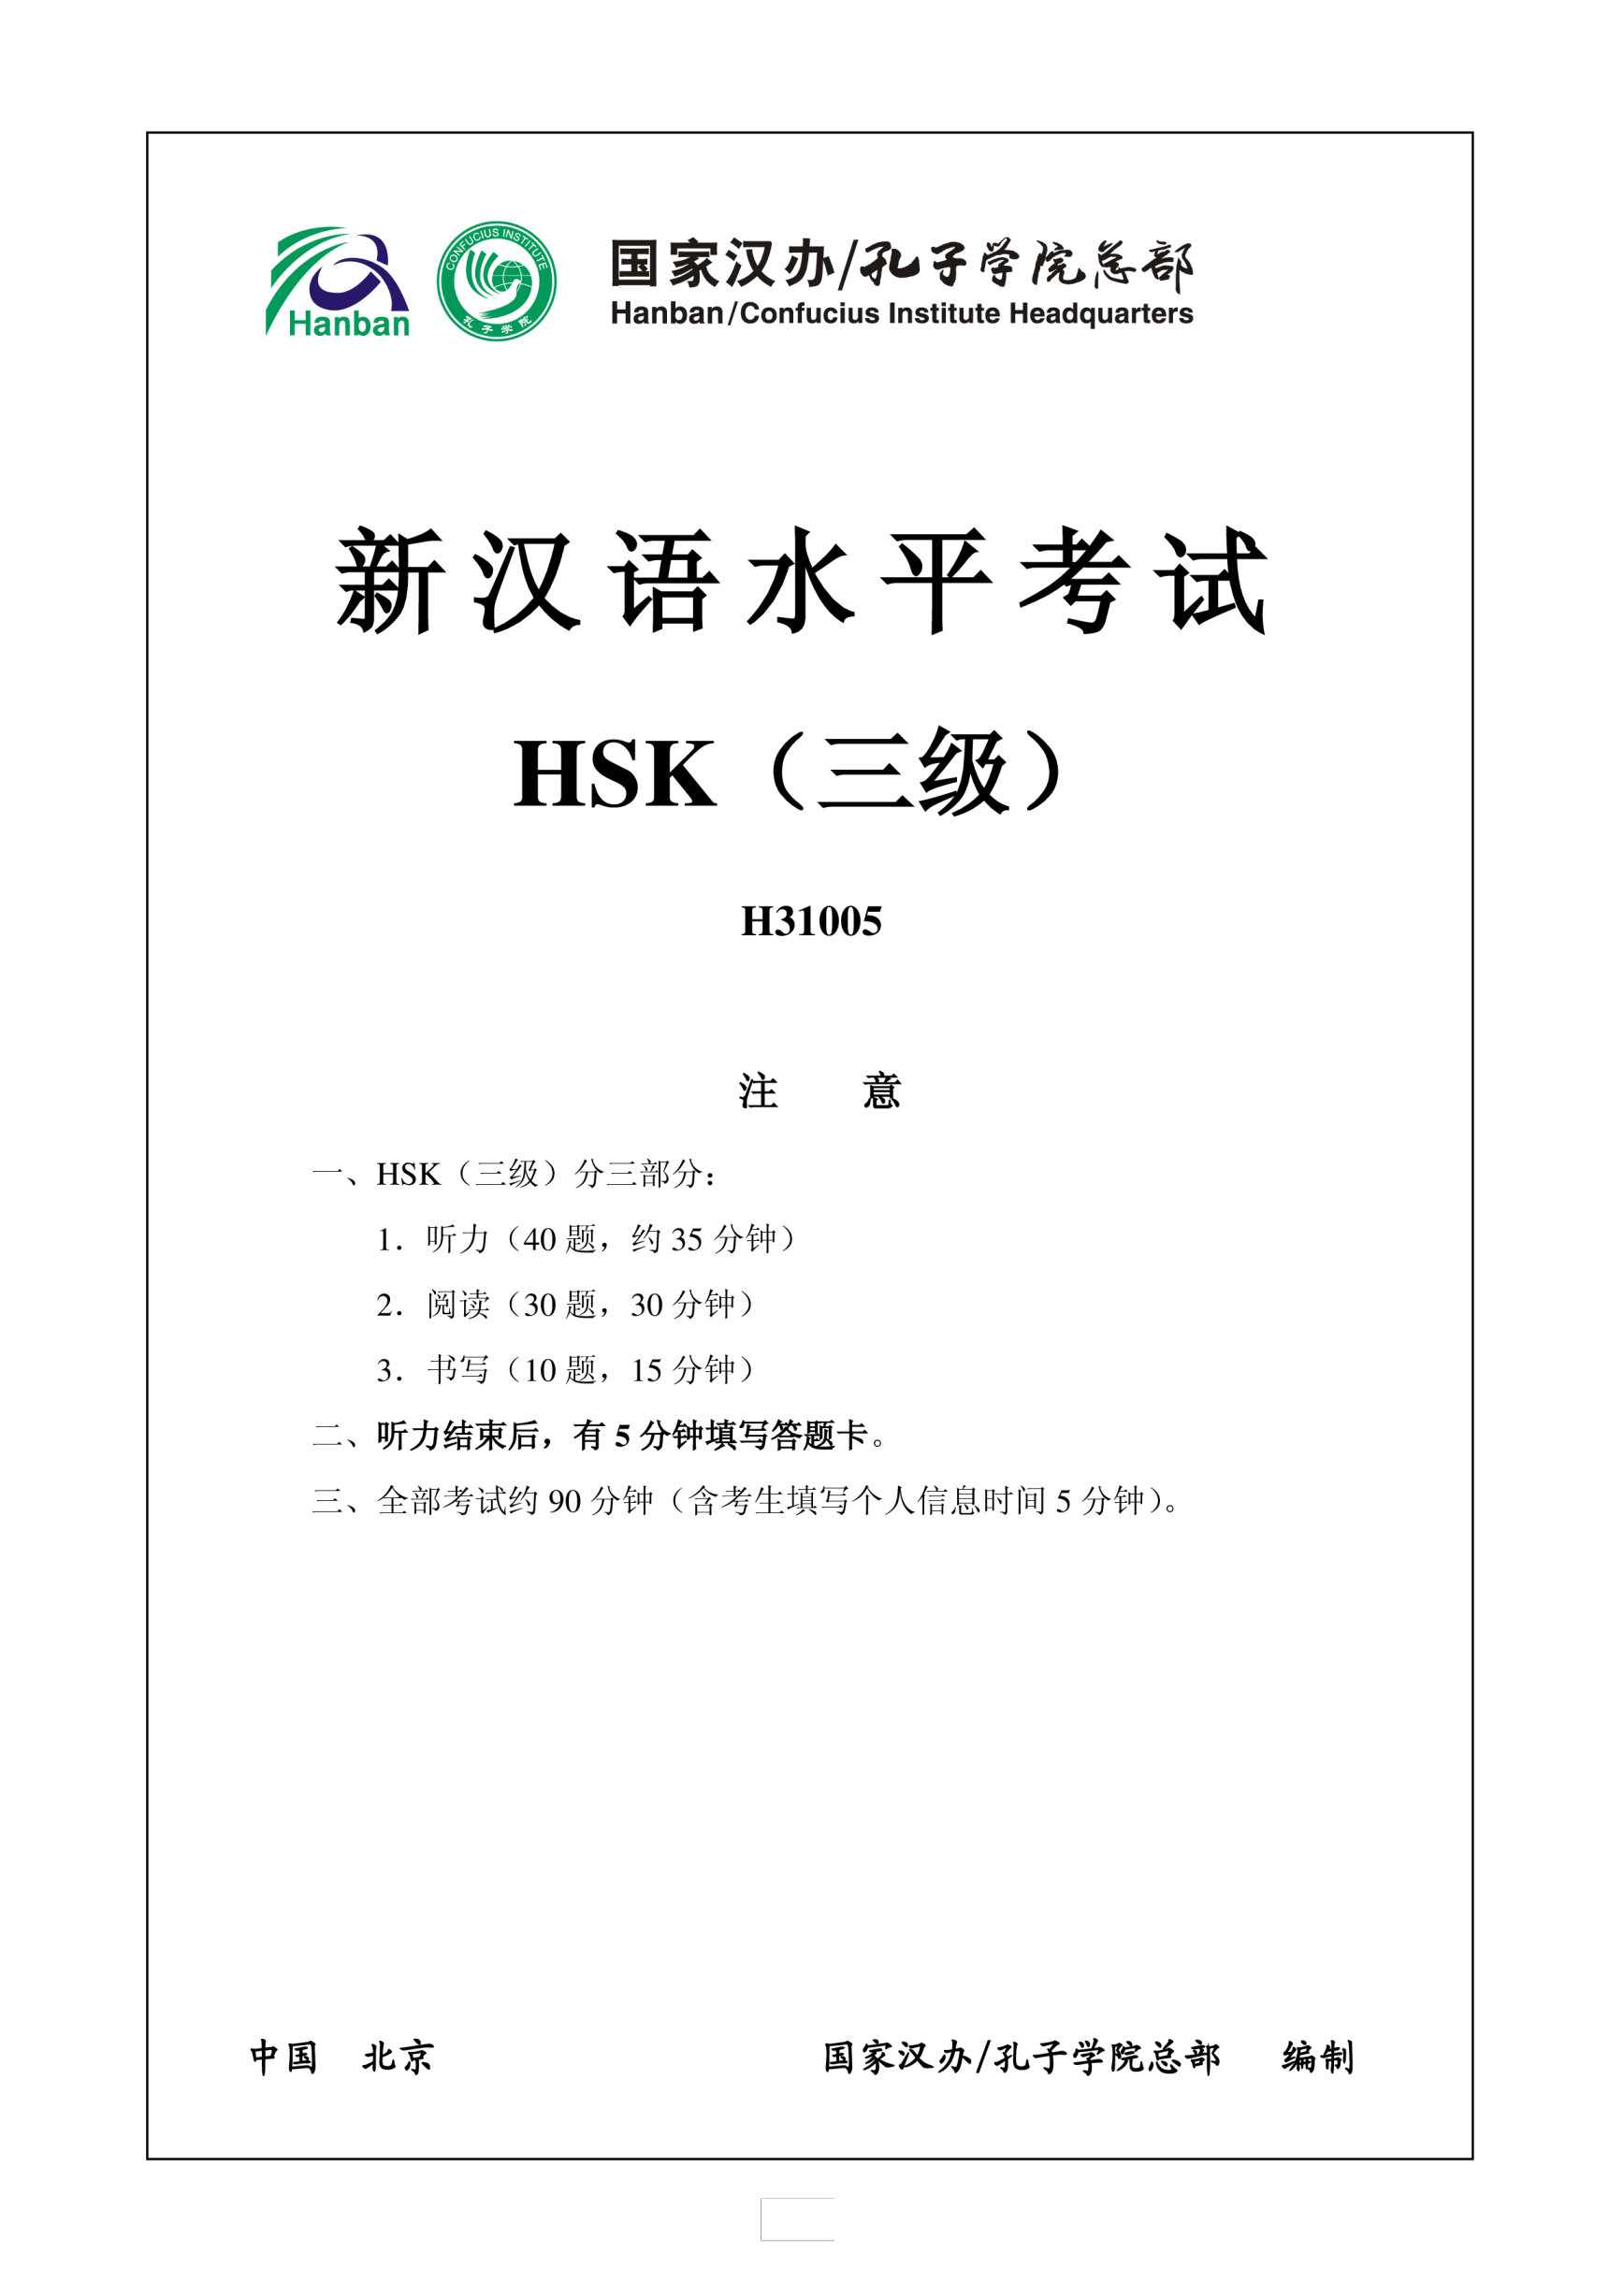 template preview imageHSK3 Chinese Exam including Answers # HSK3 H31005